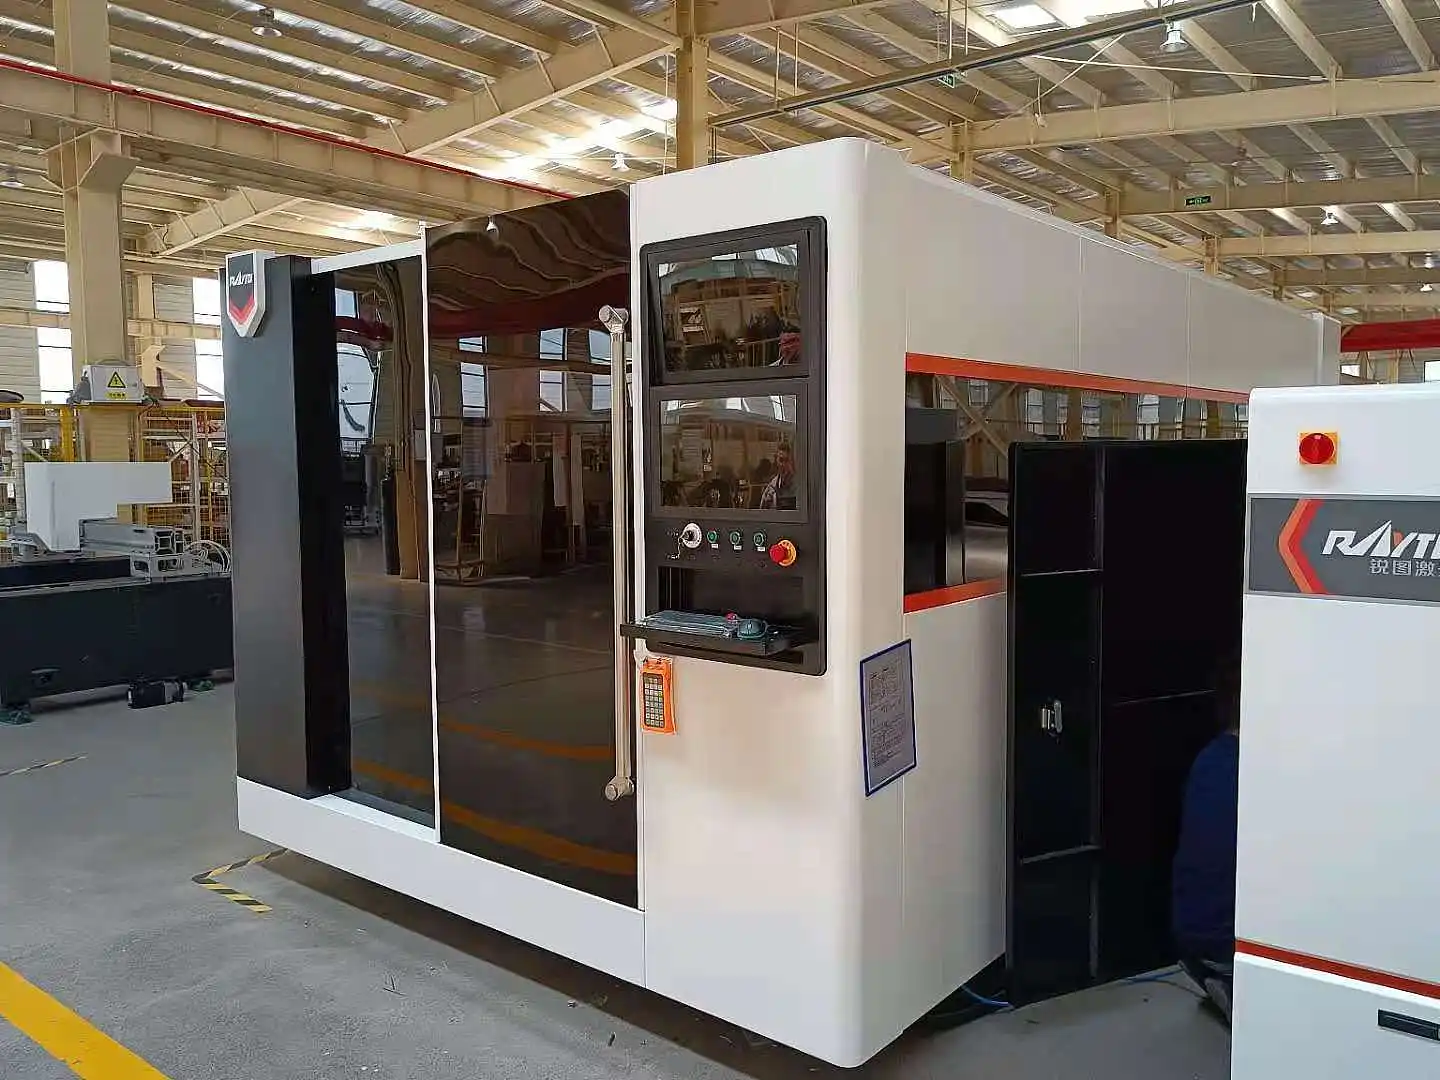 What is the normal maintenance process of fiber laser cutting machine?